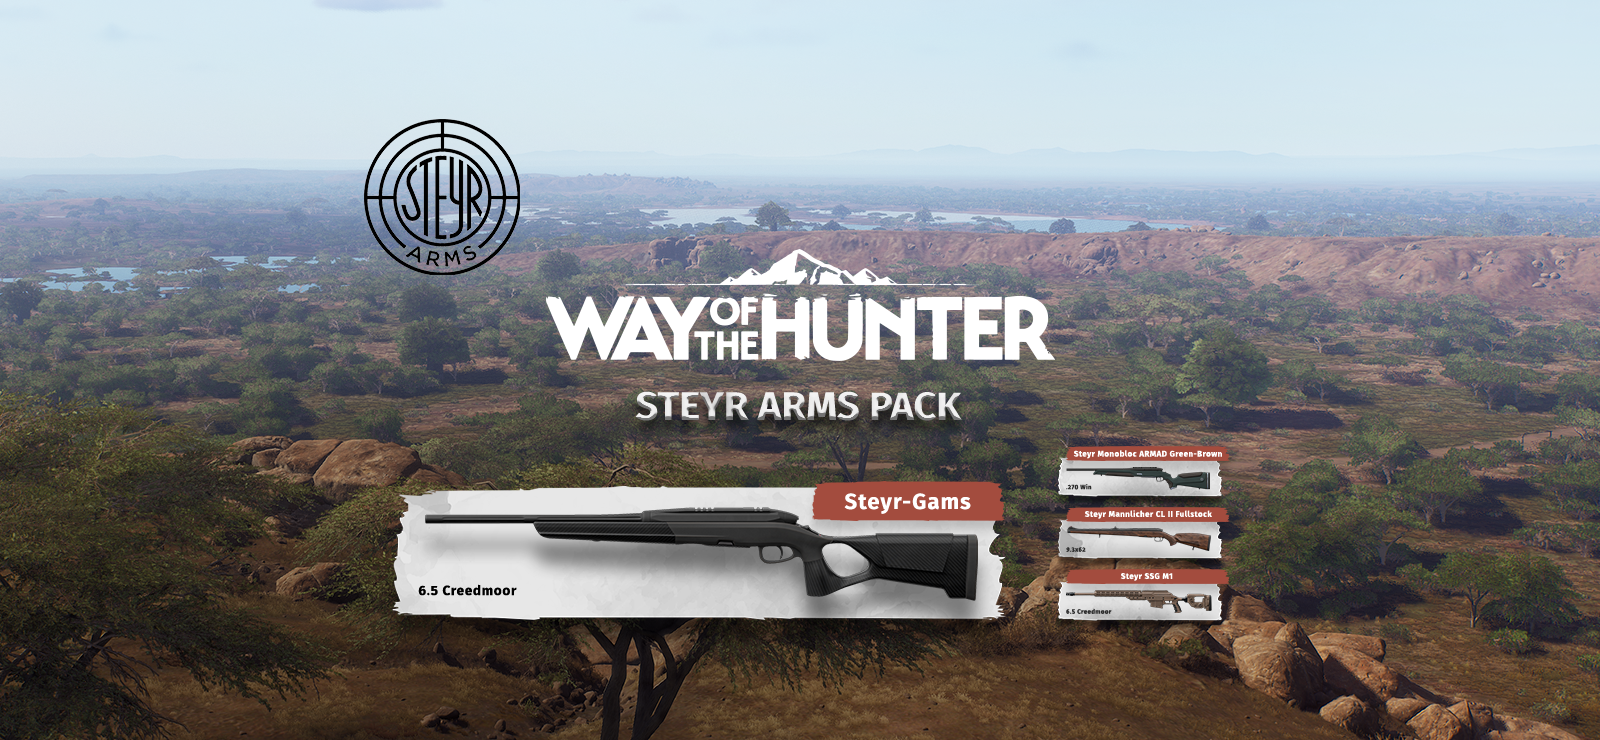 Way Of The Hunter – Steyr Arms Pack